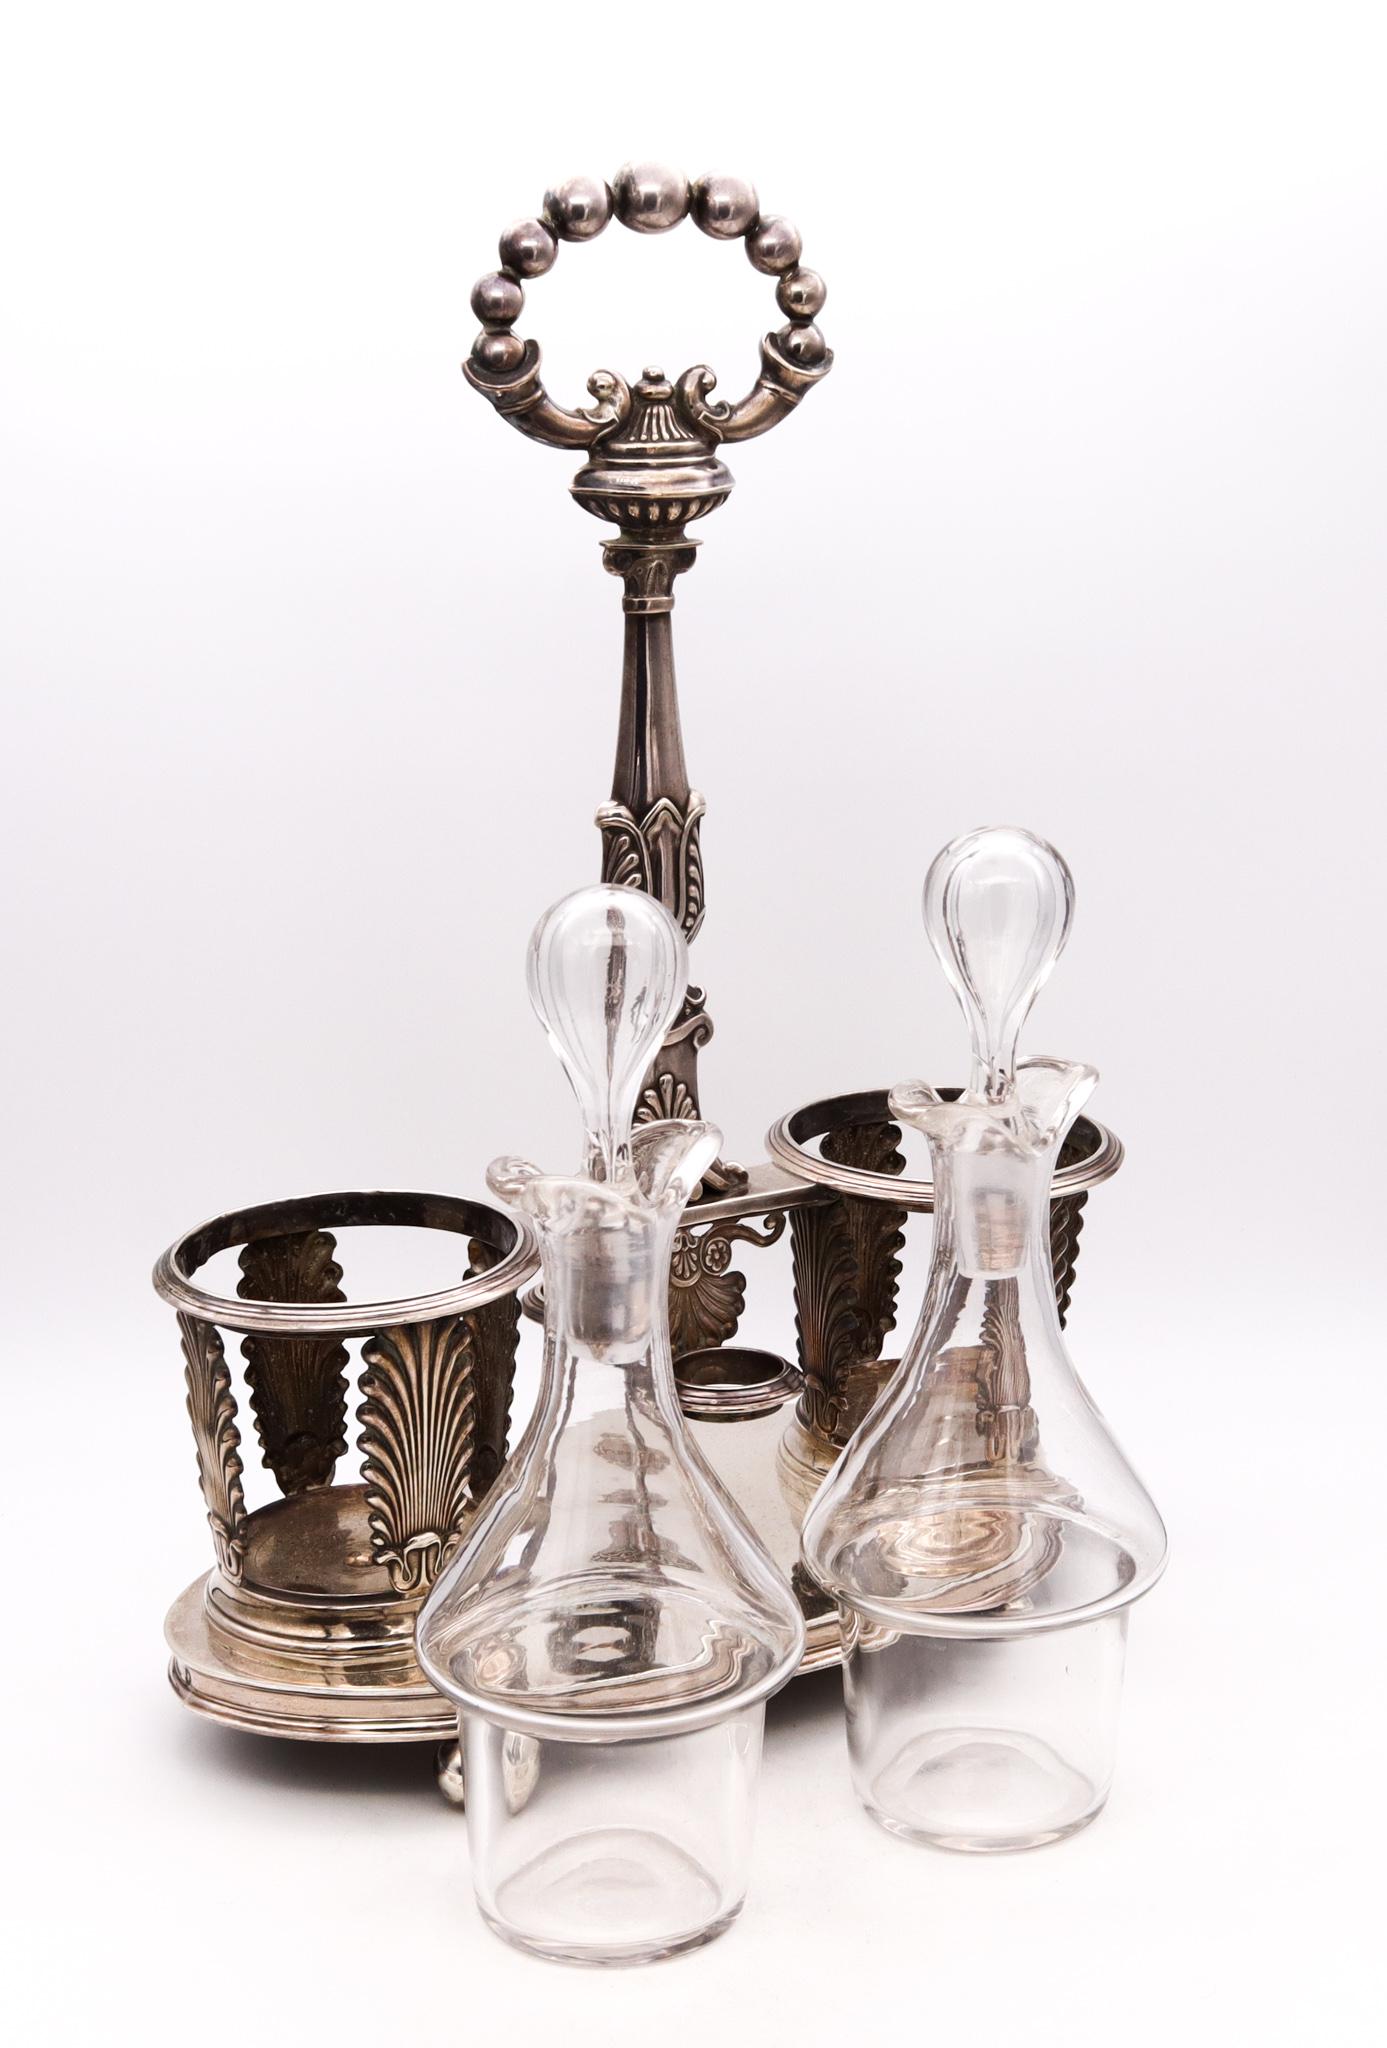 France Lyon 1838 By Armand Caillat Neoclassical Hoilier Cruet Set .950 Sterling In Excellent Condition For Sale In Miami, FL